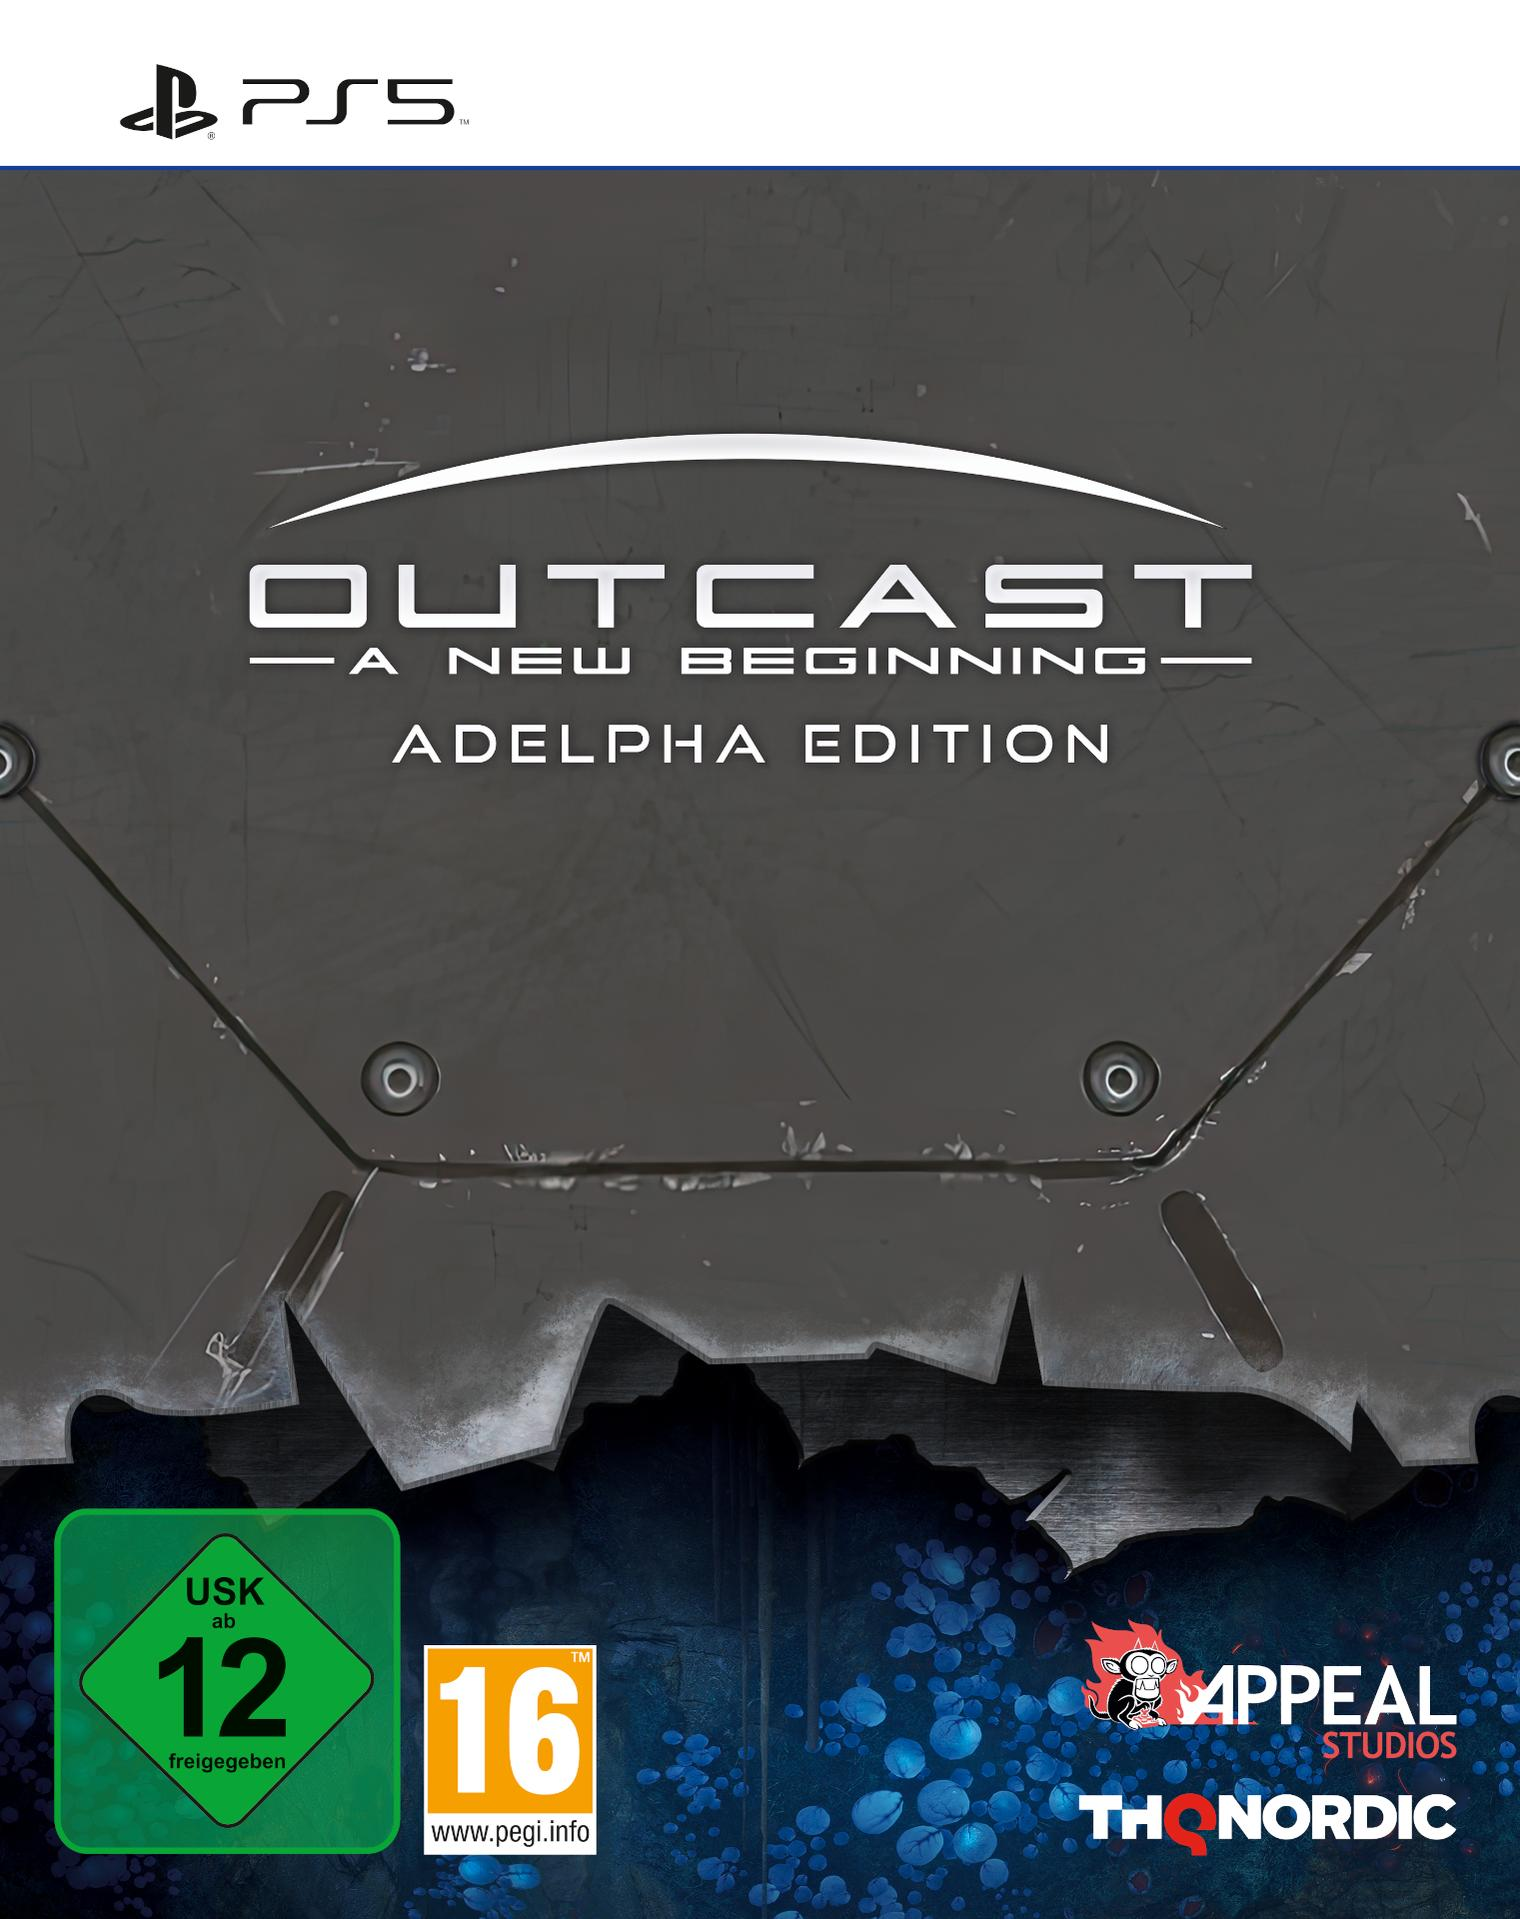 Beginning Edition [PlayStation Outcast - - - A 5] New Adelpha